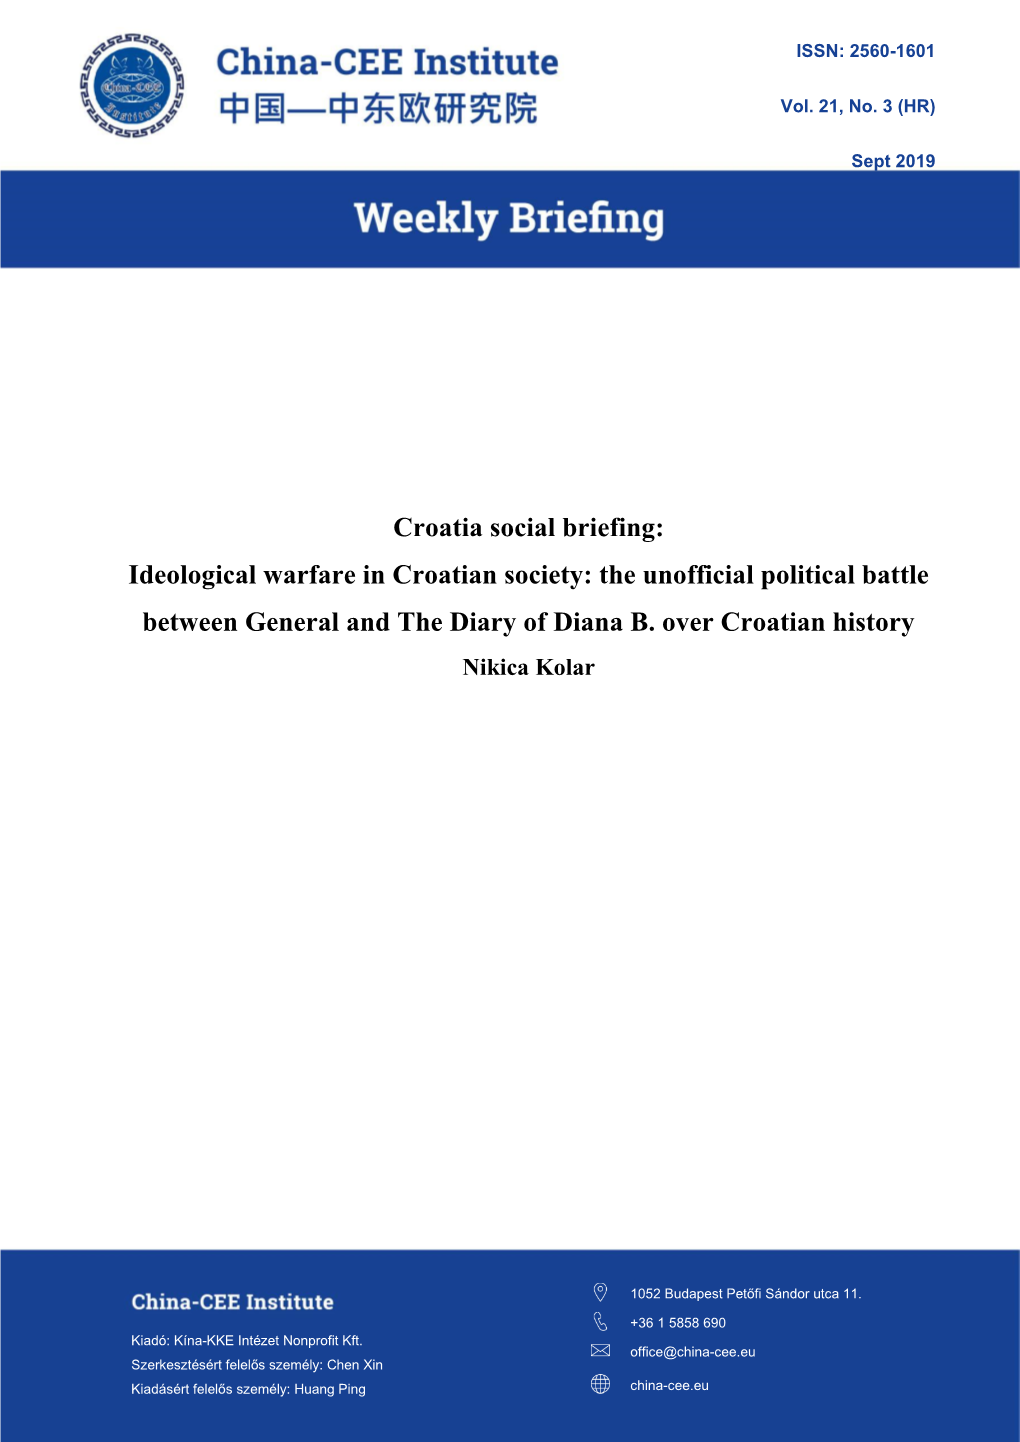 Croatia Social Briefing: Ideological Warfare in Croatian Society: the Unofficial Political Battle Between General and the Diary of Diana B